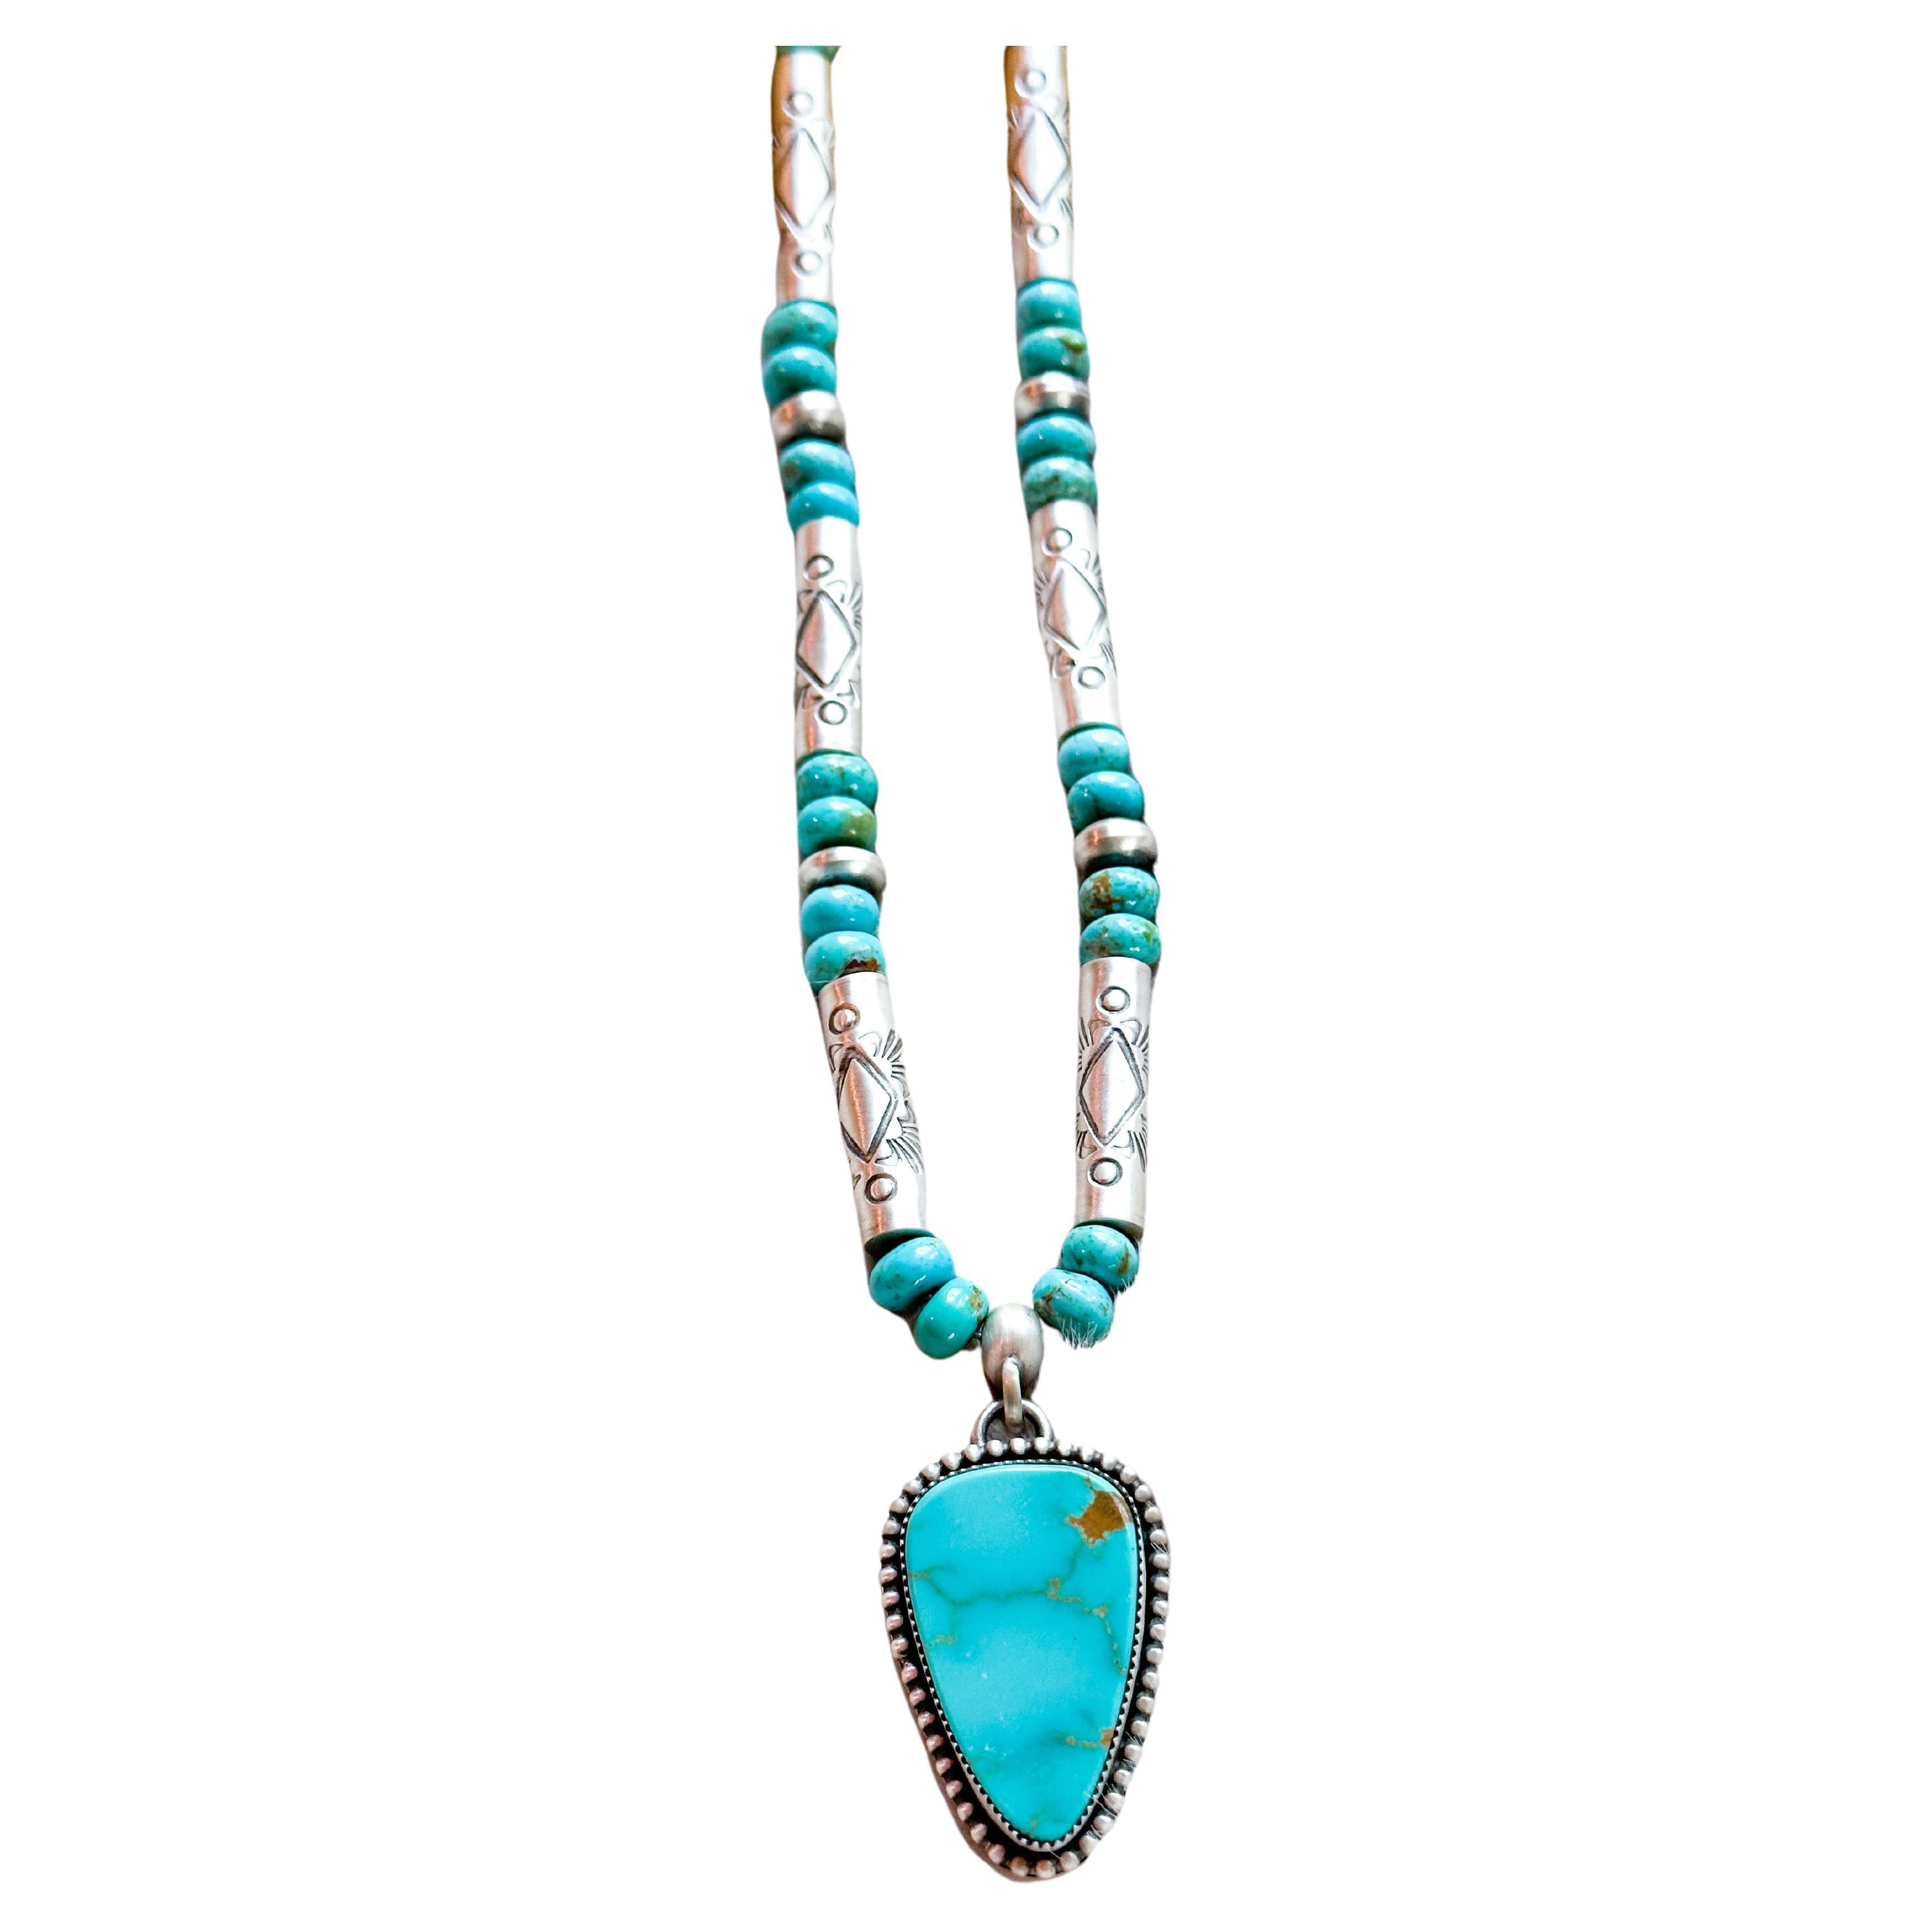 Kingman Turquoise Fine Silver Beaded Necklace with Sonoran Pendant For Sale